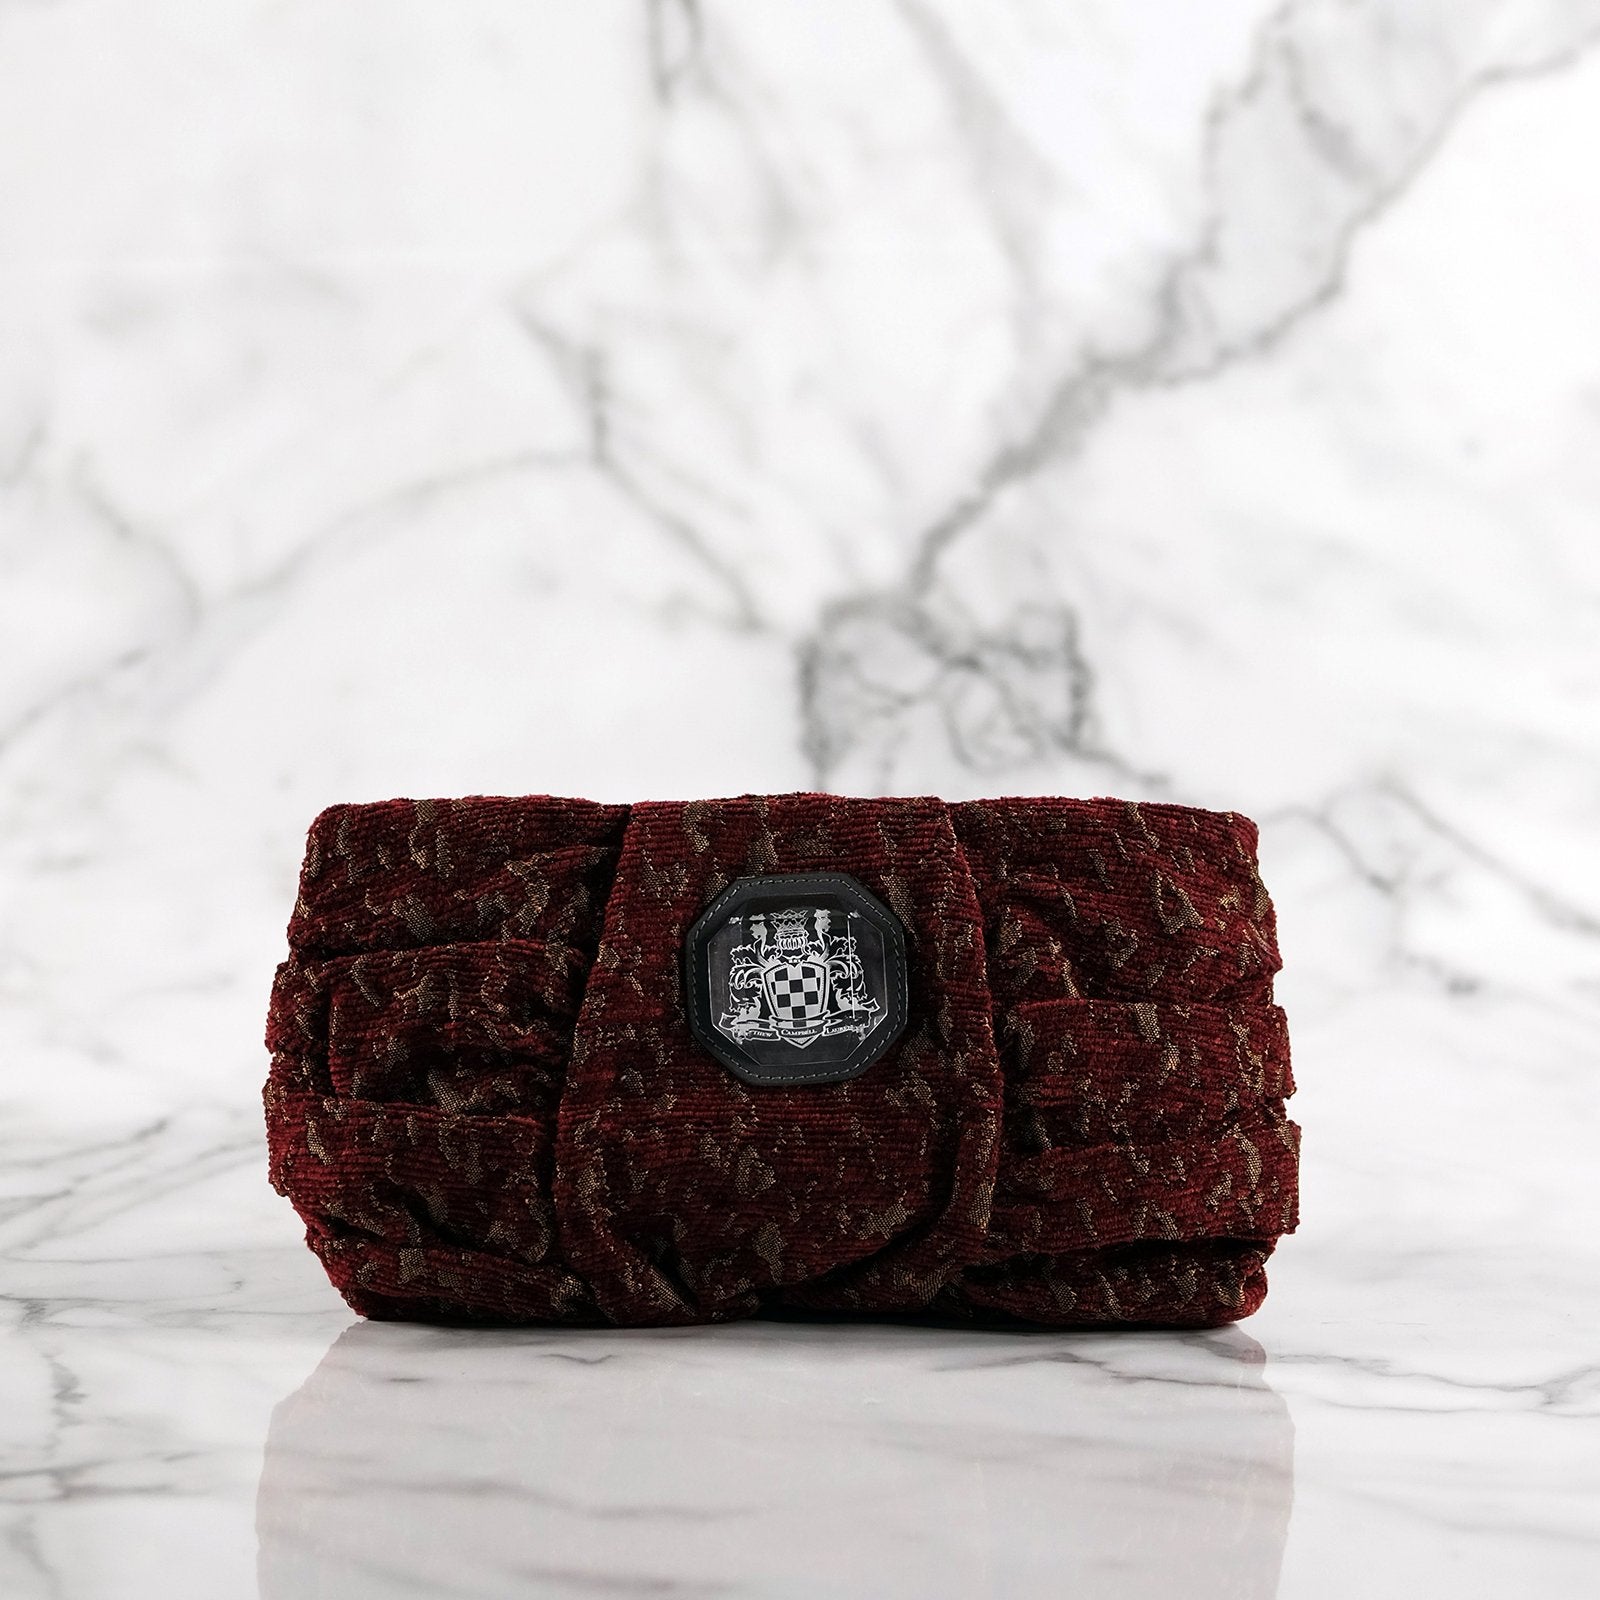 Giselle deep red and bronze croco patterned suede clutch